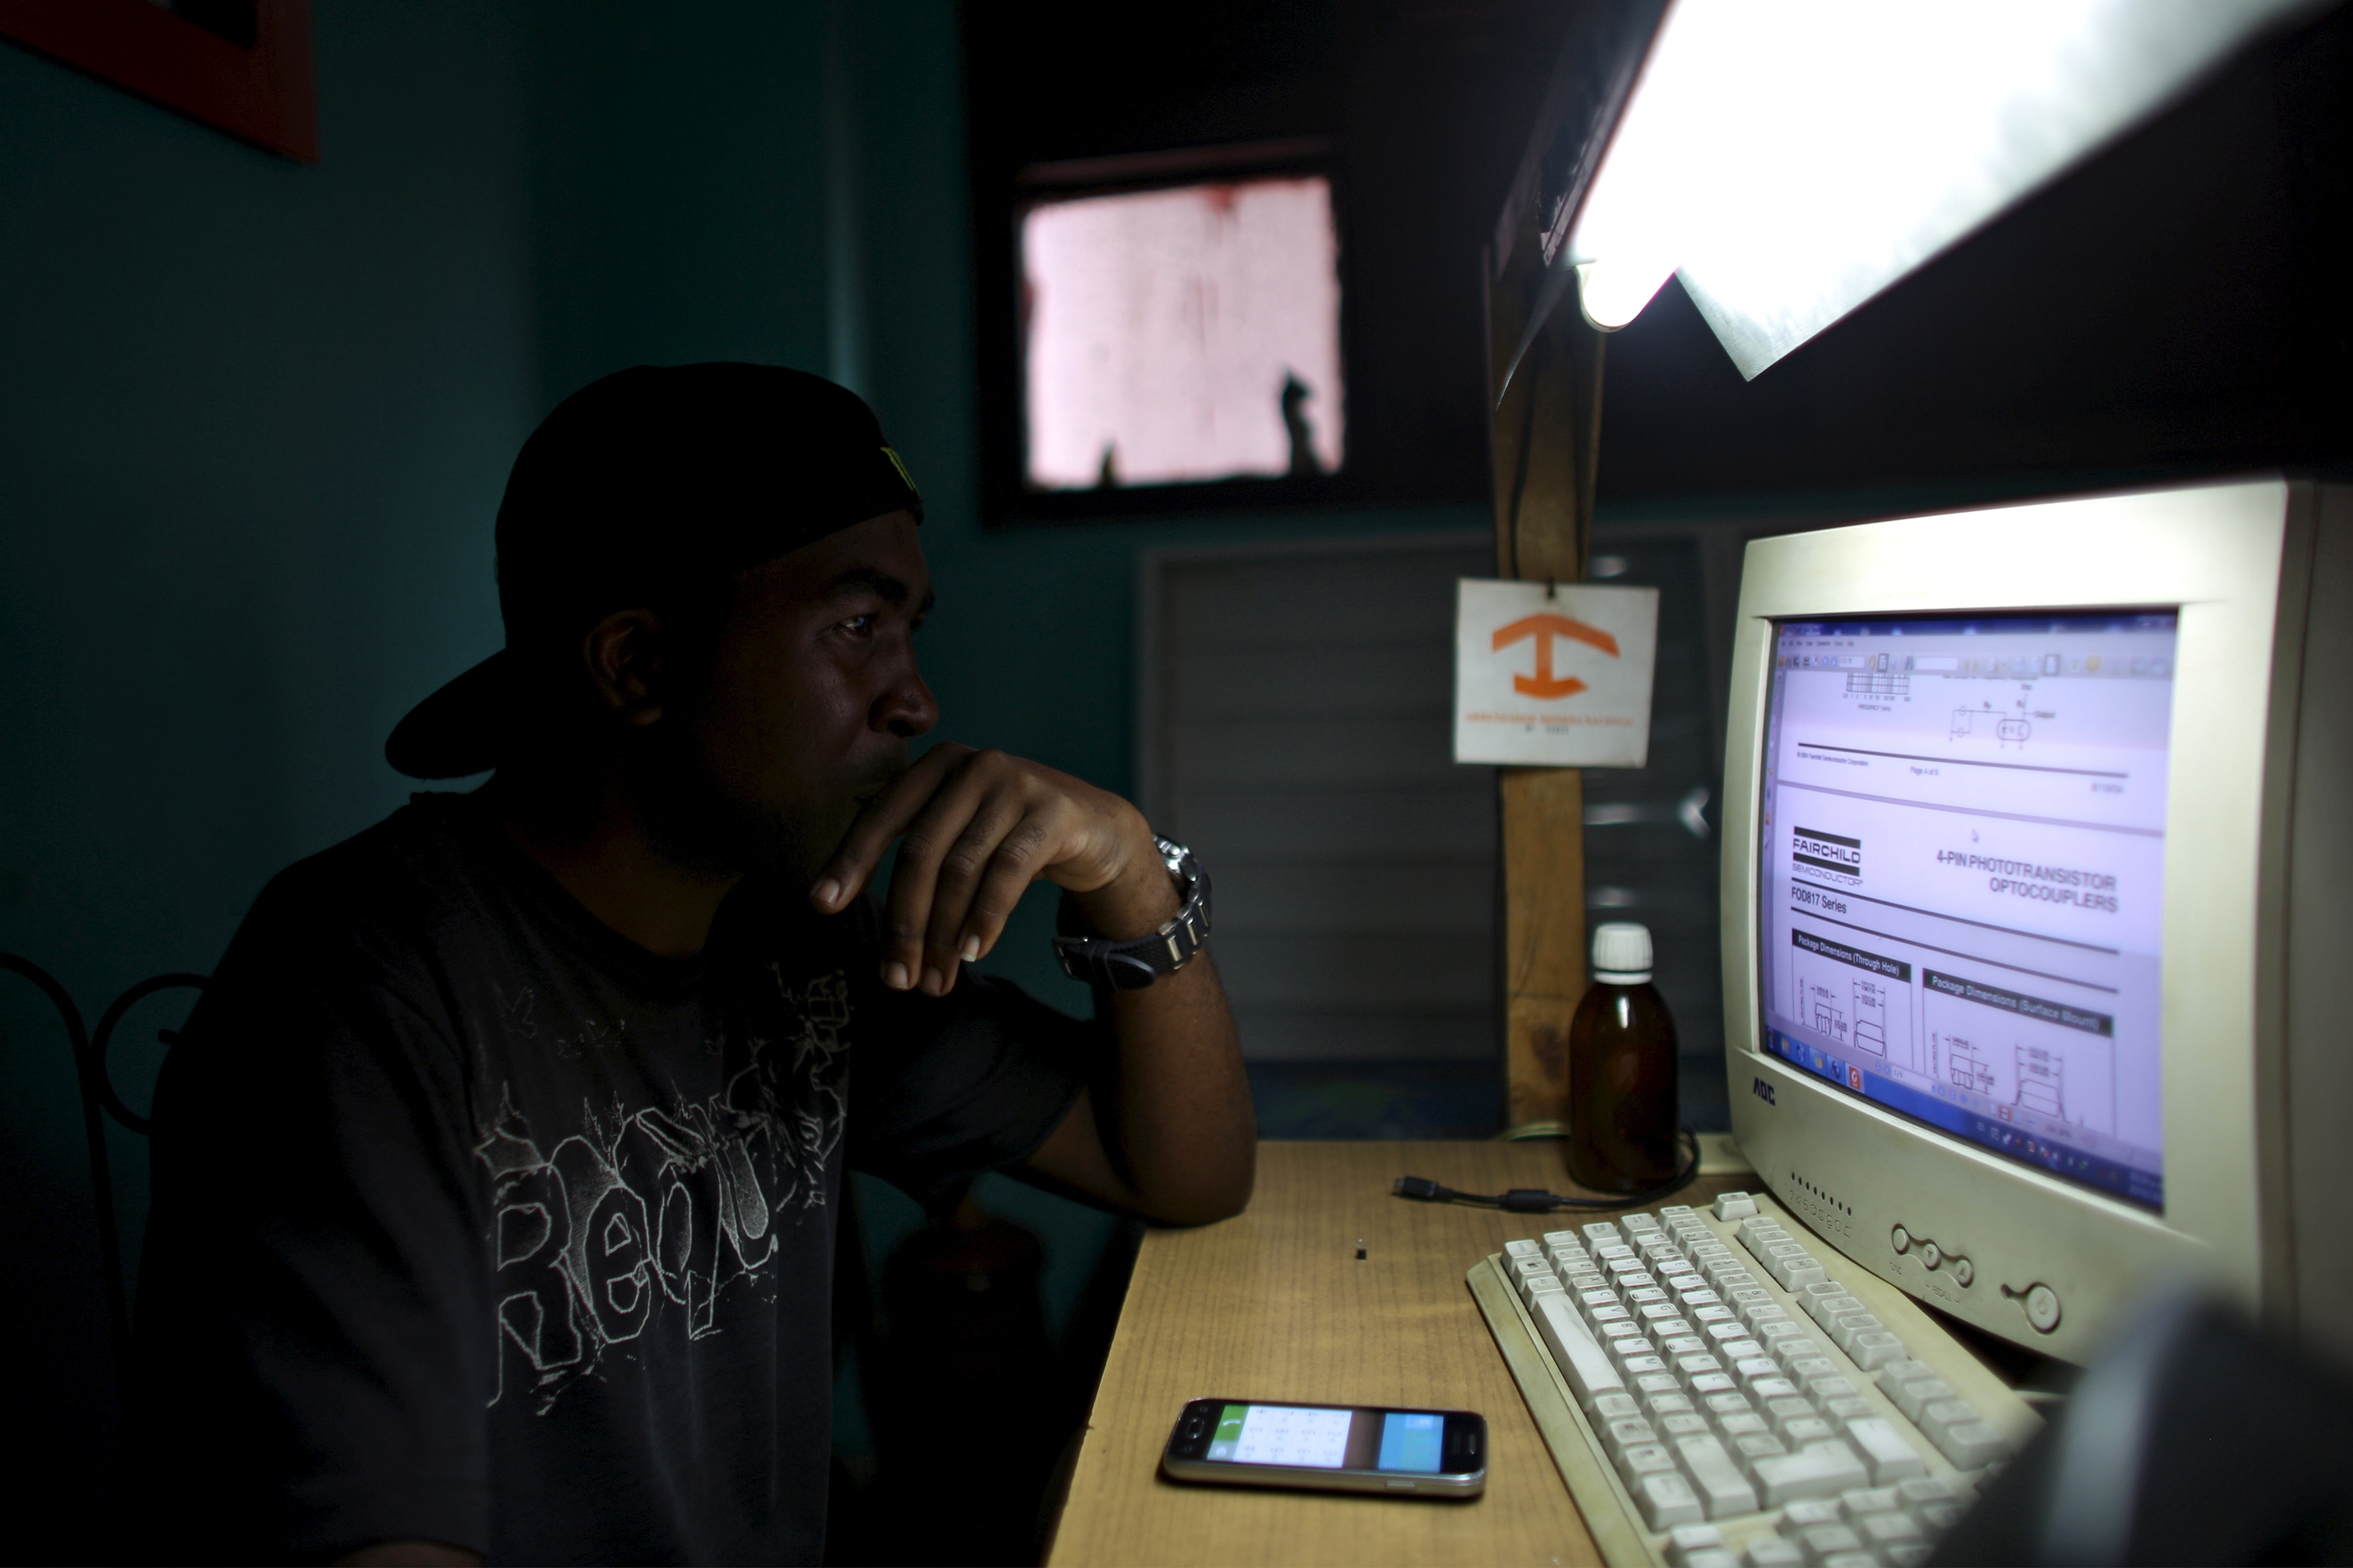 An informatics technician is pictured at the mobile phone repair shop where he works in Havana, 23 February 2016, REUTERS/Alexandre Meneghini